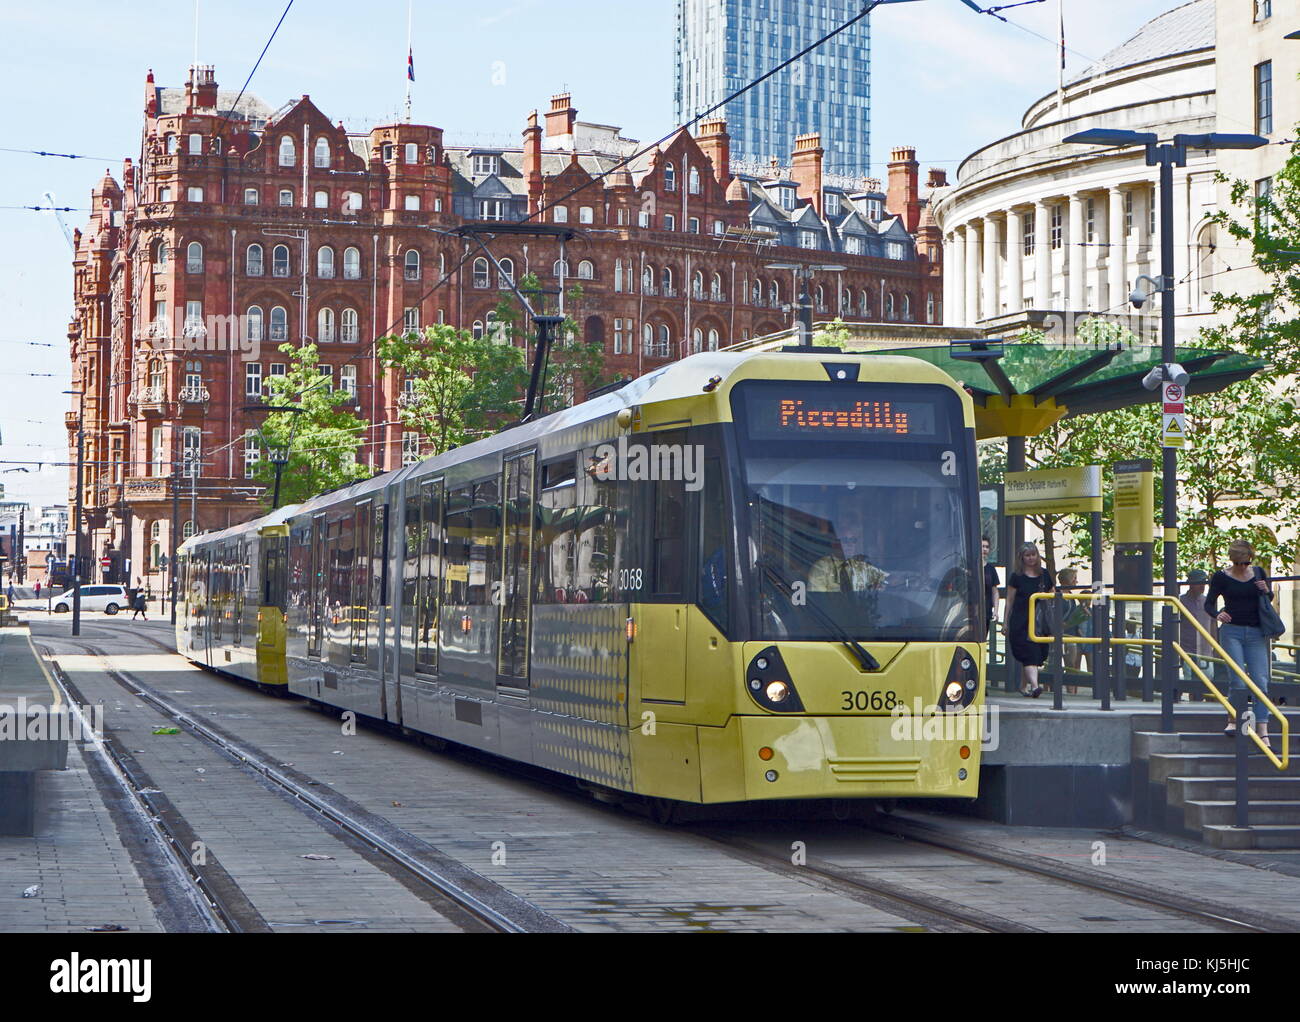 Metrolink (also known as Manchester Metrolink) tram/light rail system in Greater Manchester, England. 2017 Stock Photo